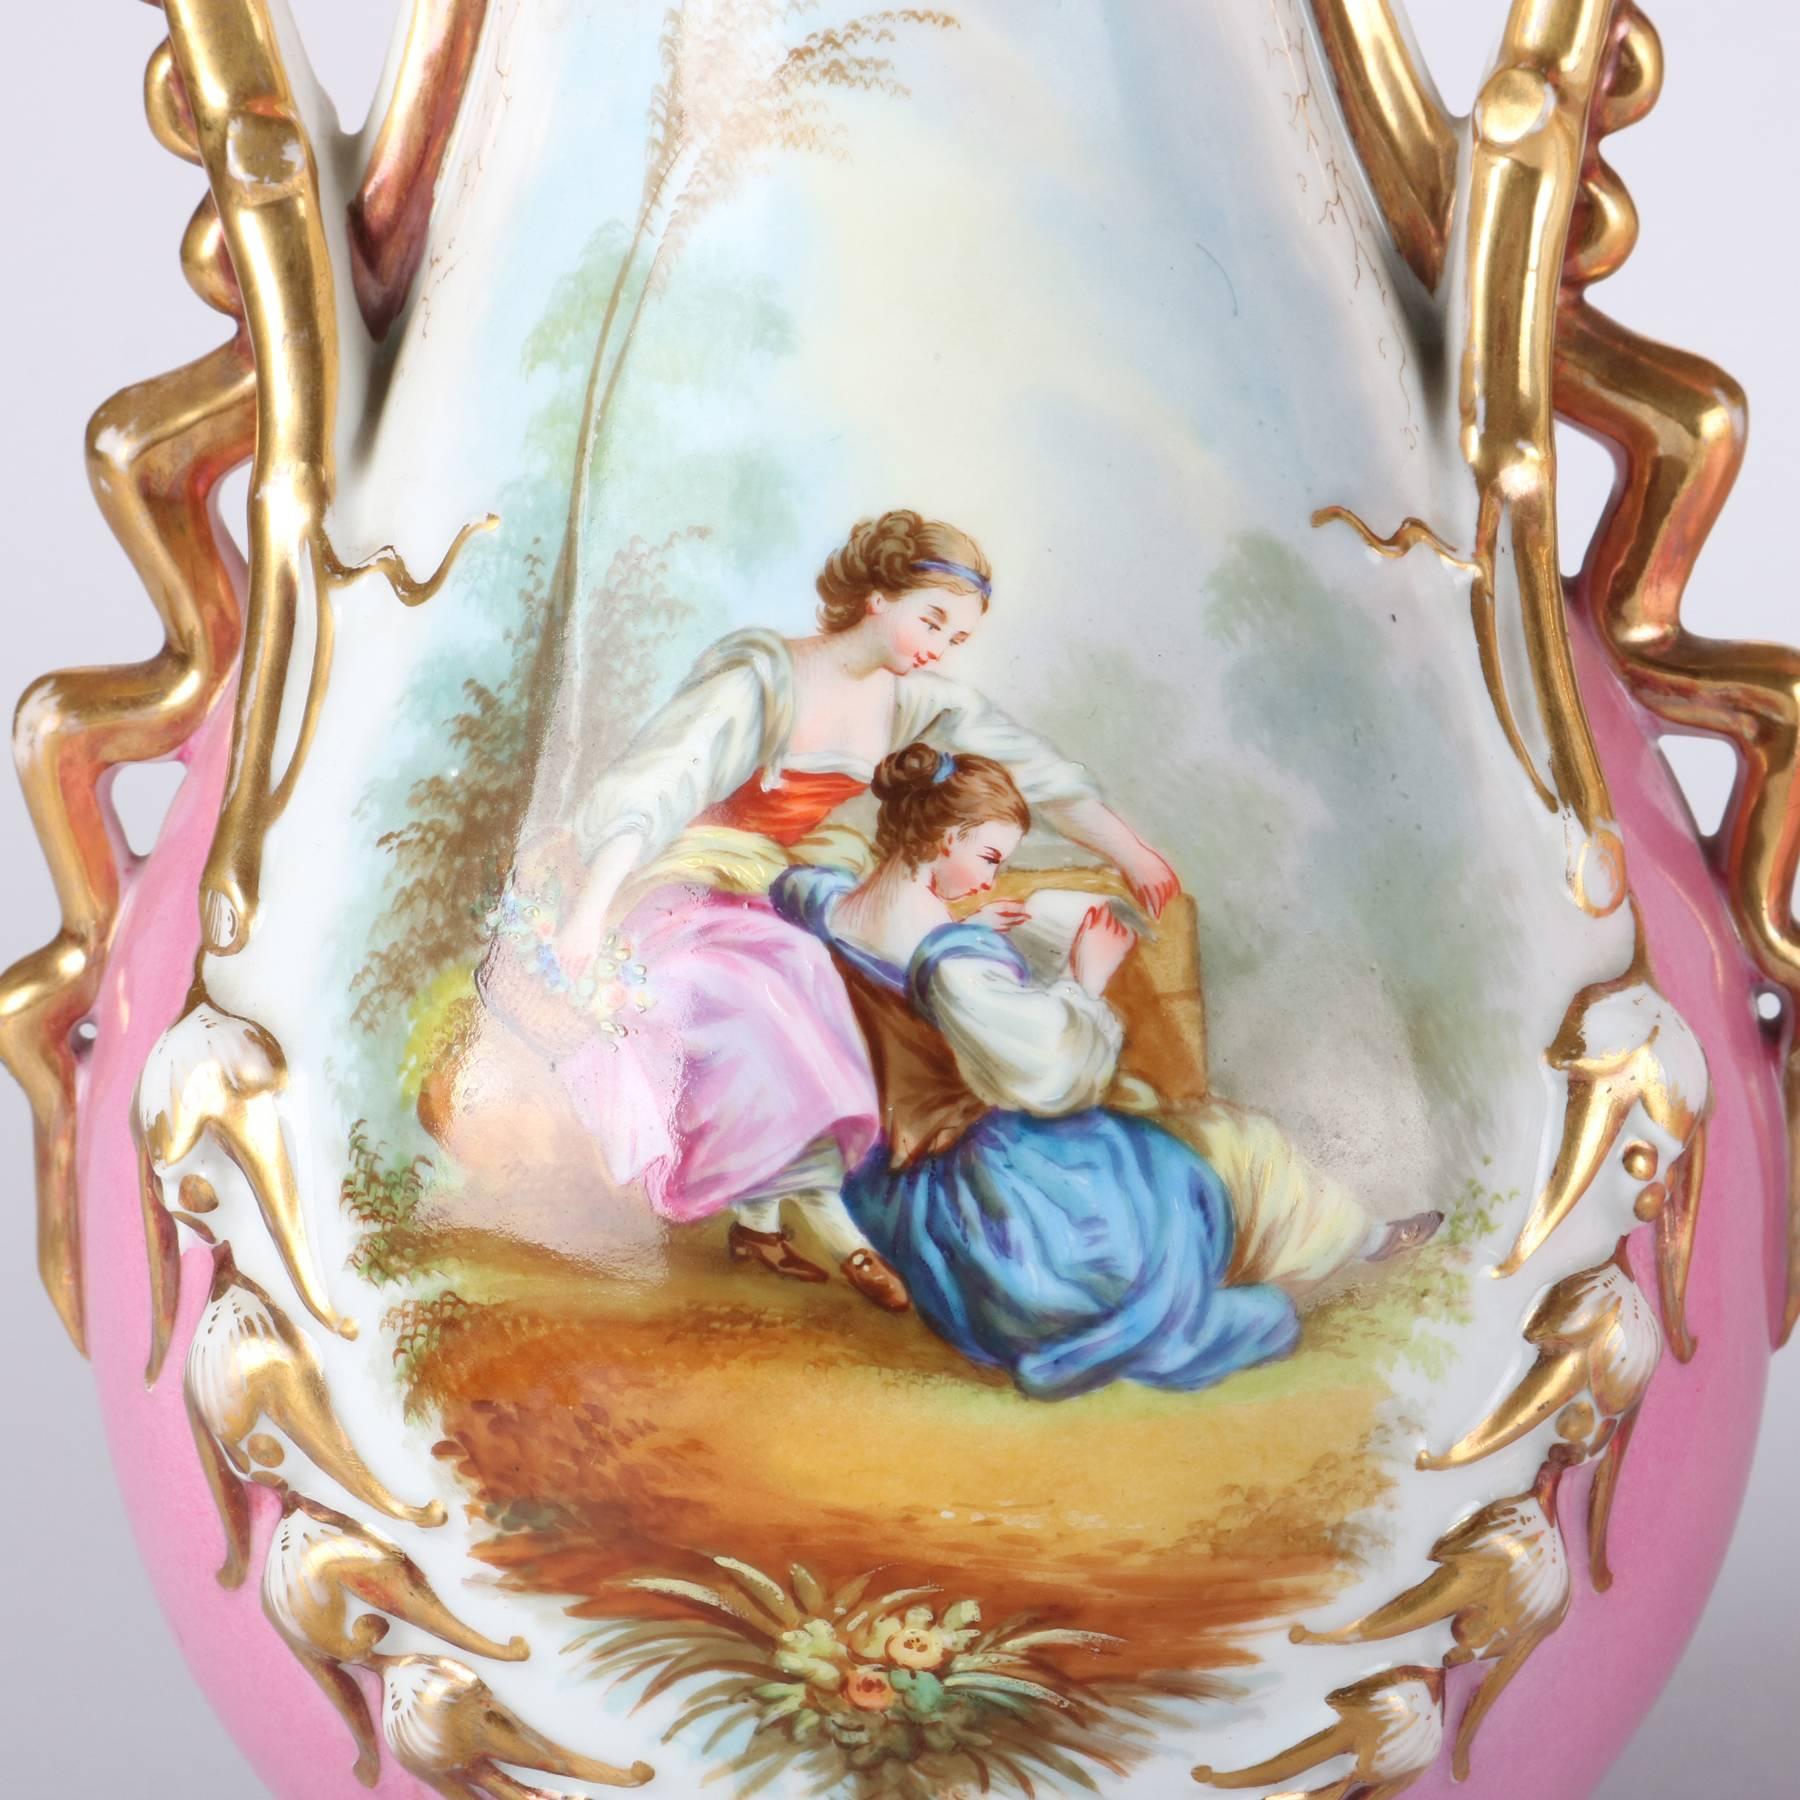 Pair of antique Old Paris porcelain portrait vases feature reserves with hand-painted courting scenes in countryside setting, gilt decorated double handles and ruffle rims, 19th century

Measure - 14